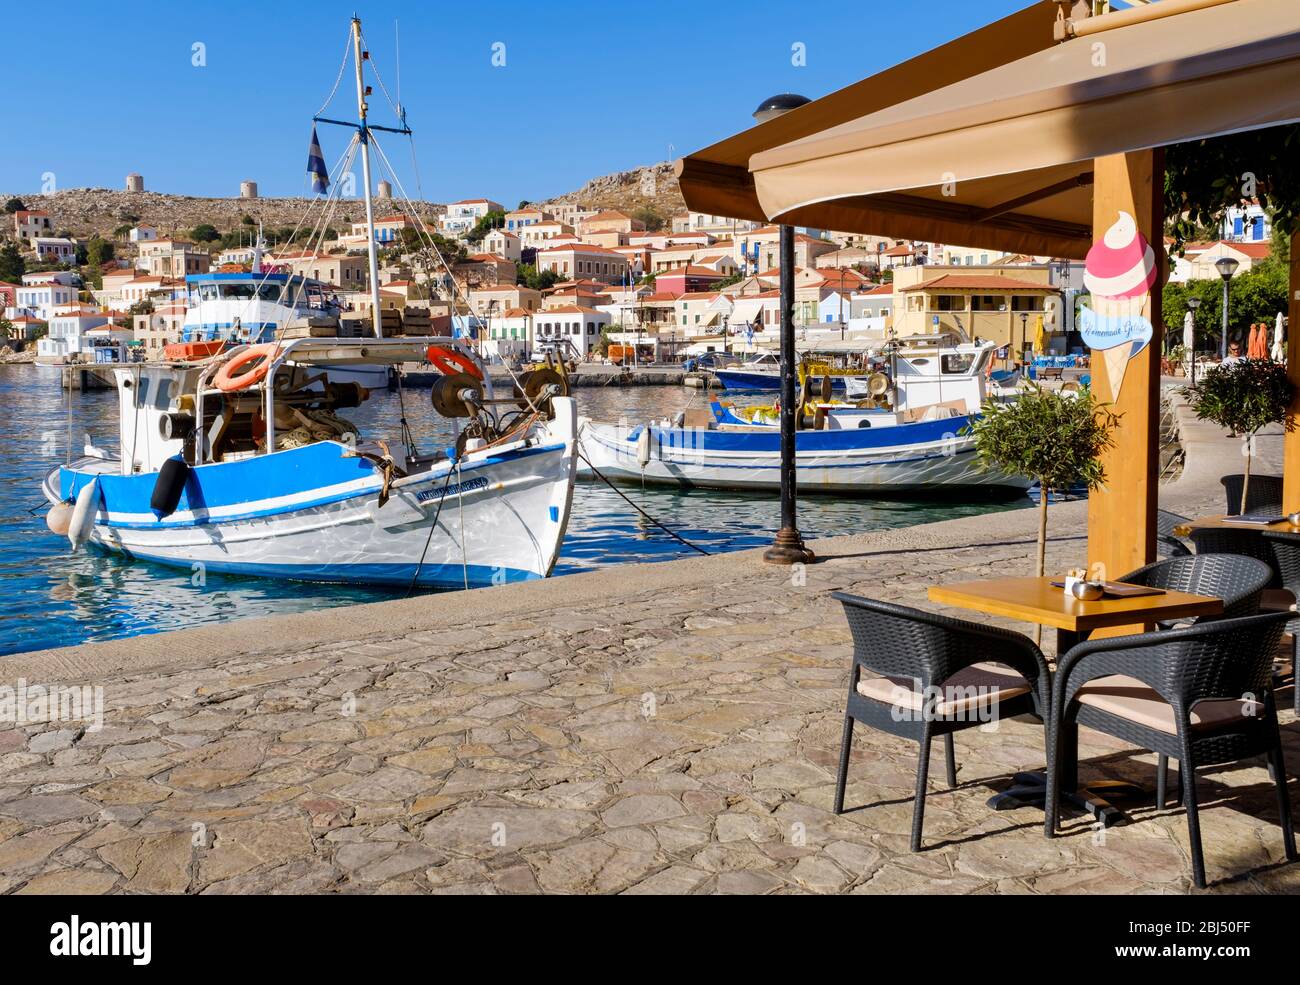 Halki cafe bar next to the fishing boats in the harbour. Stock Photo